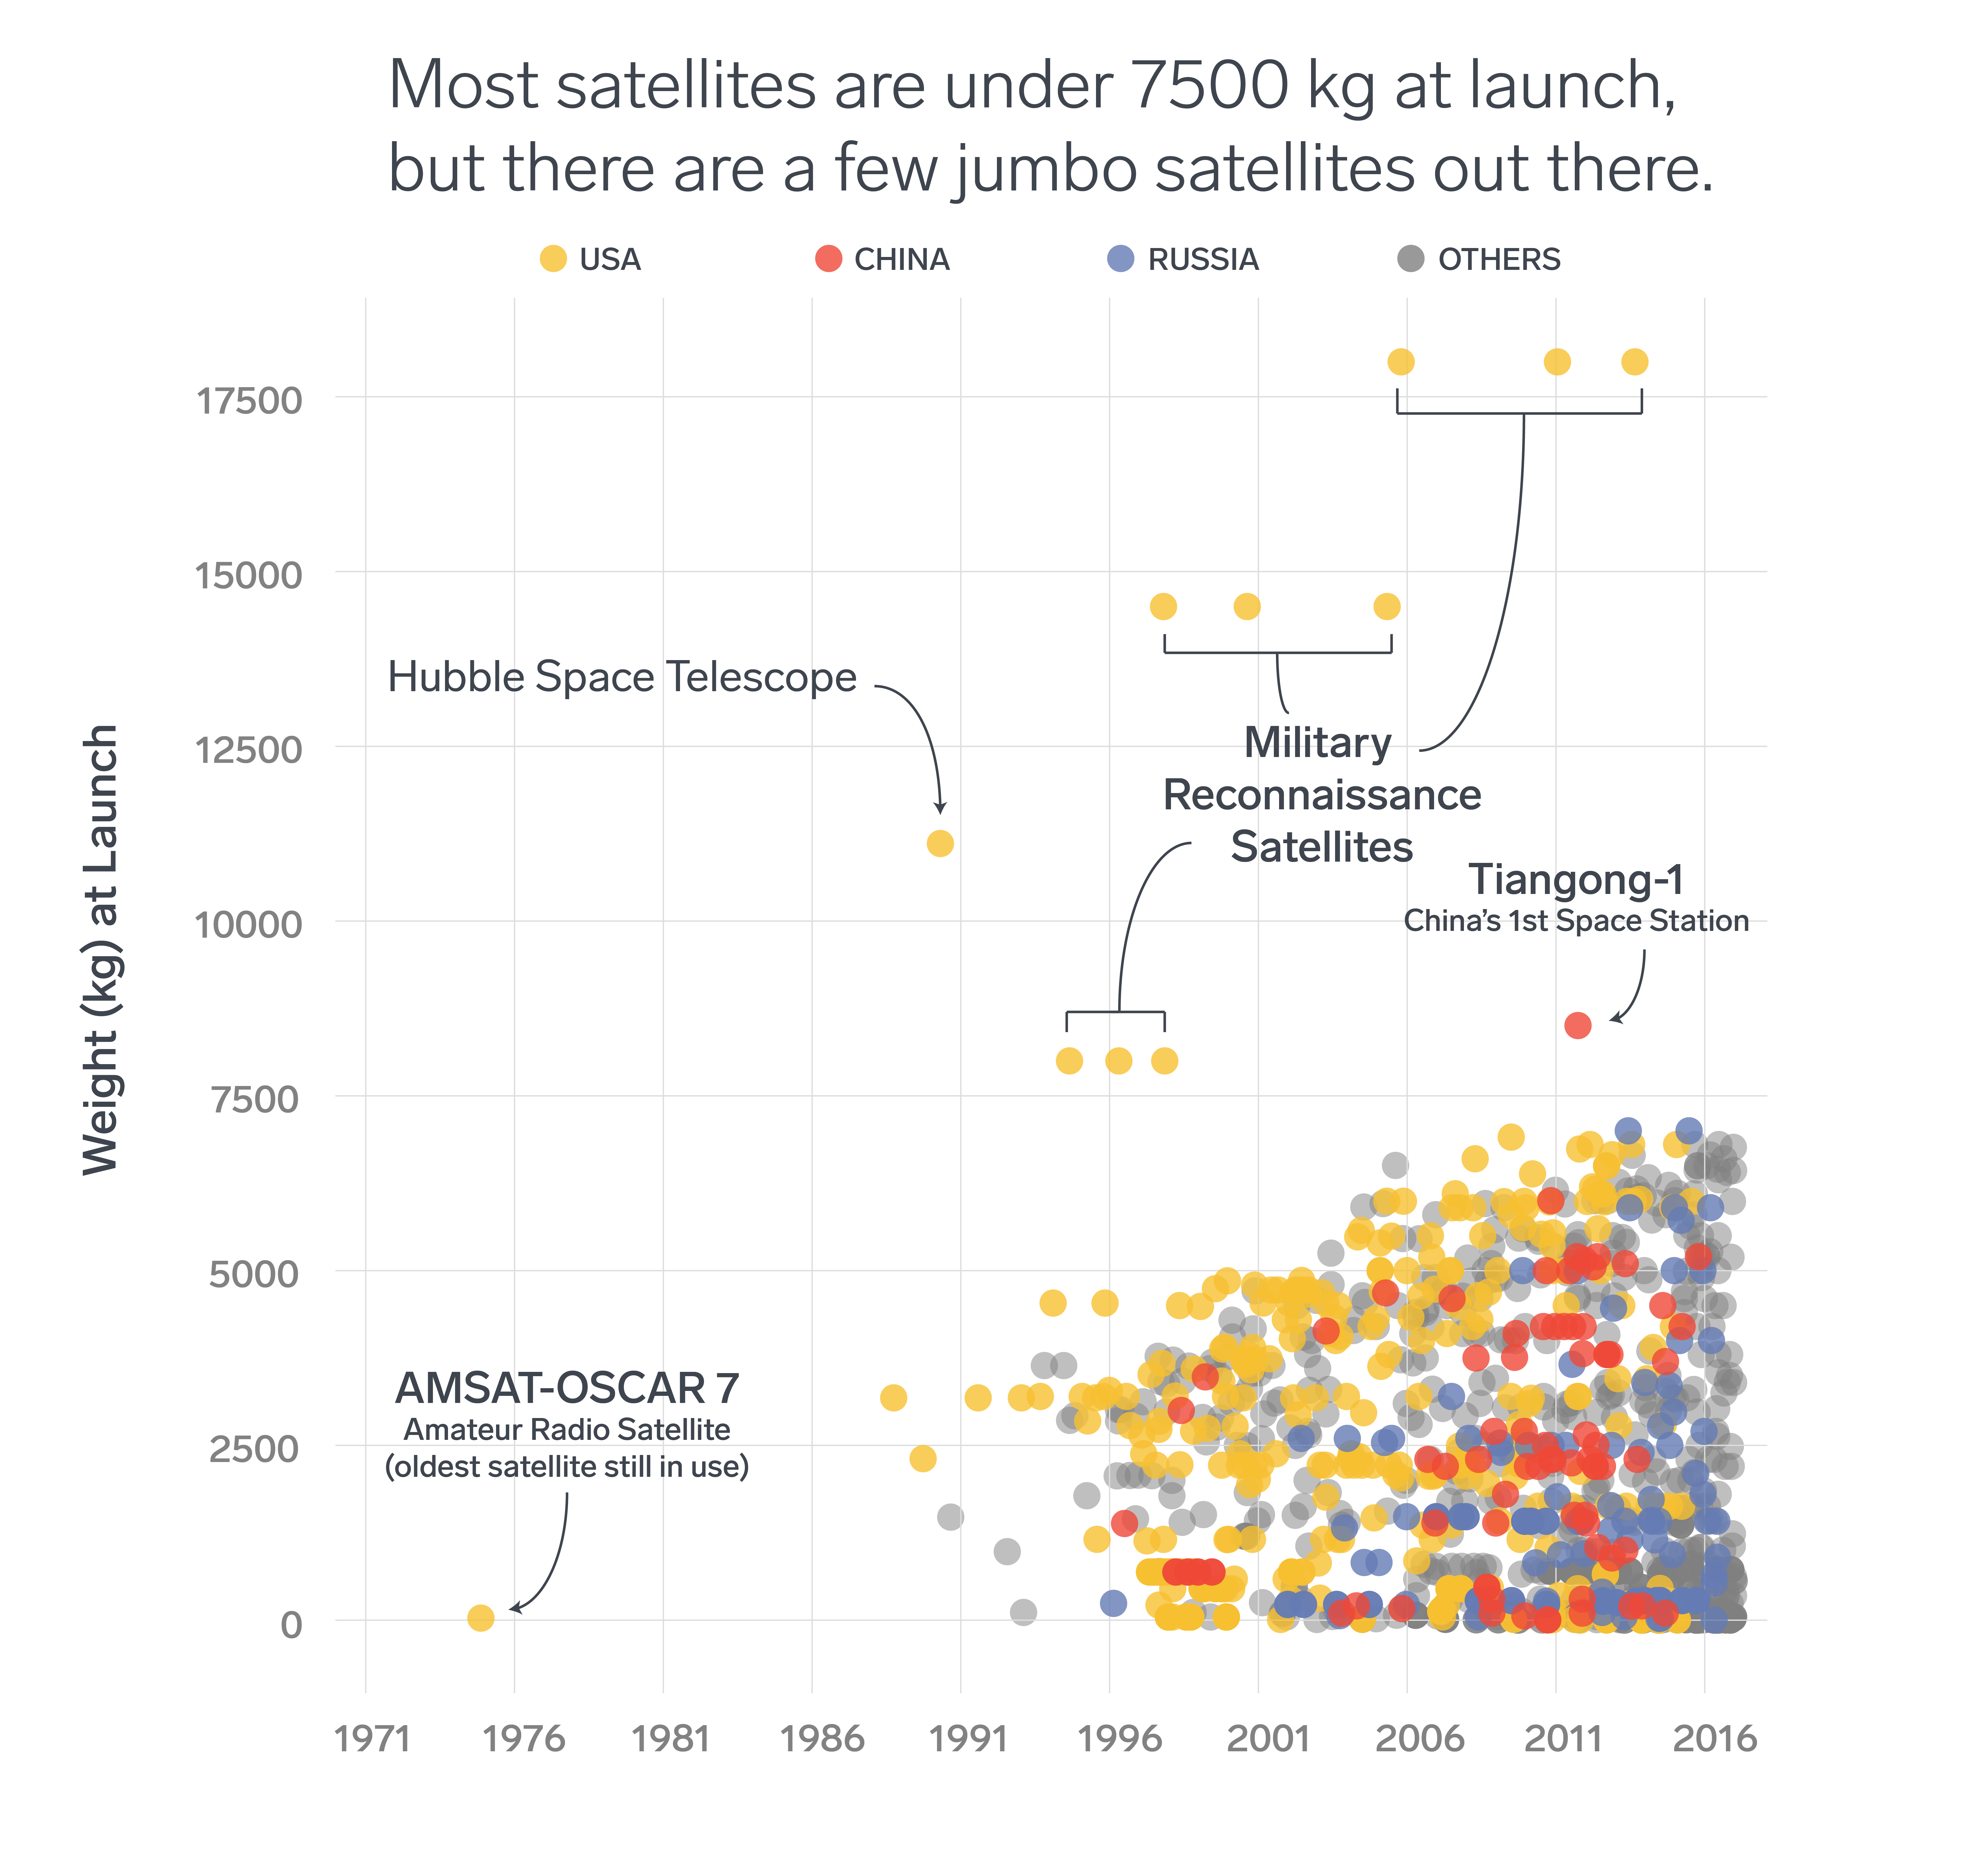 Image of a scatterplot of satellite data.